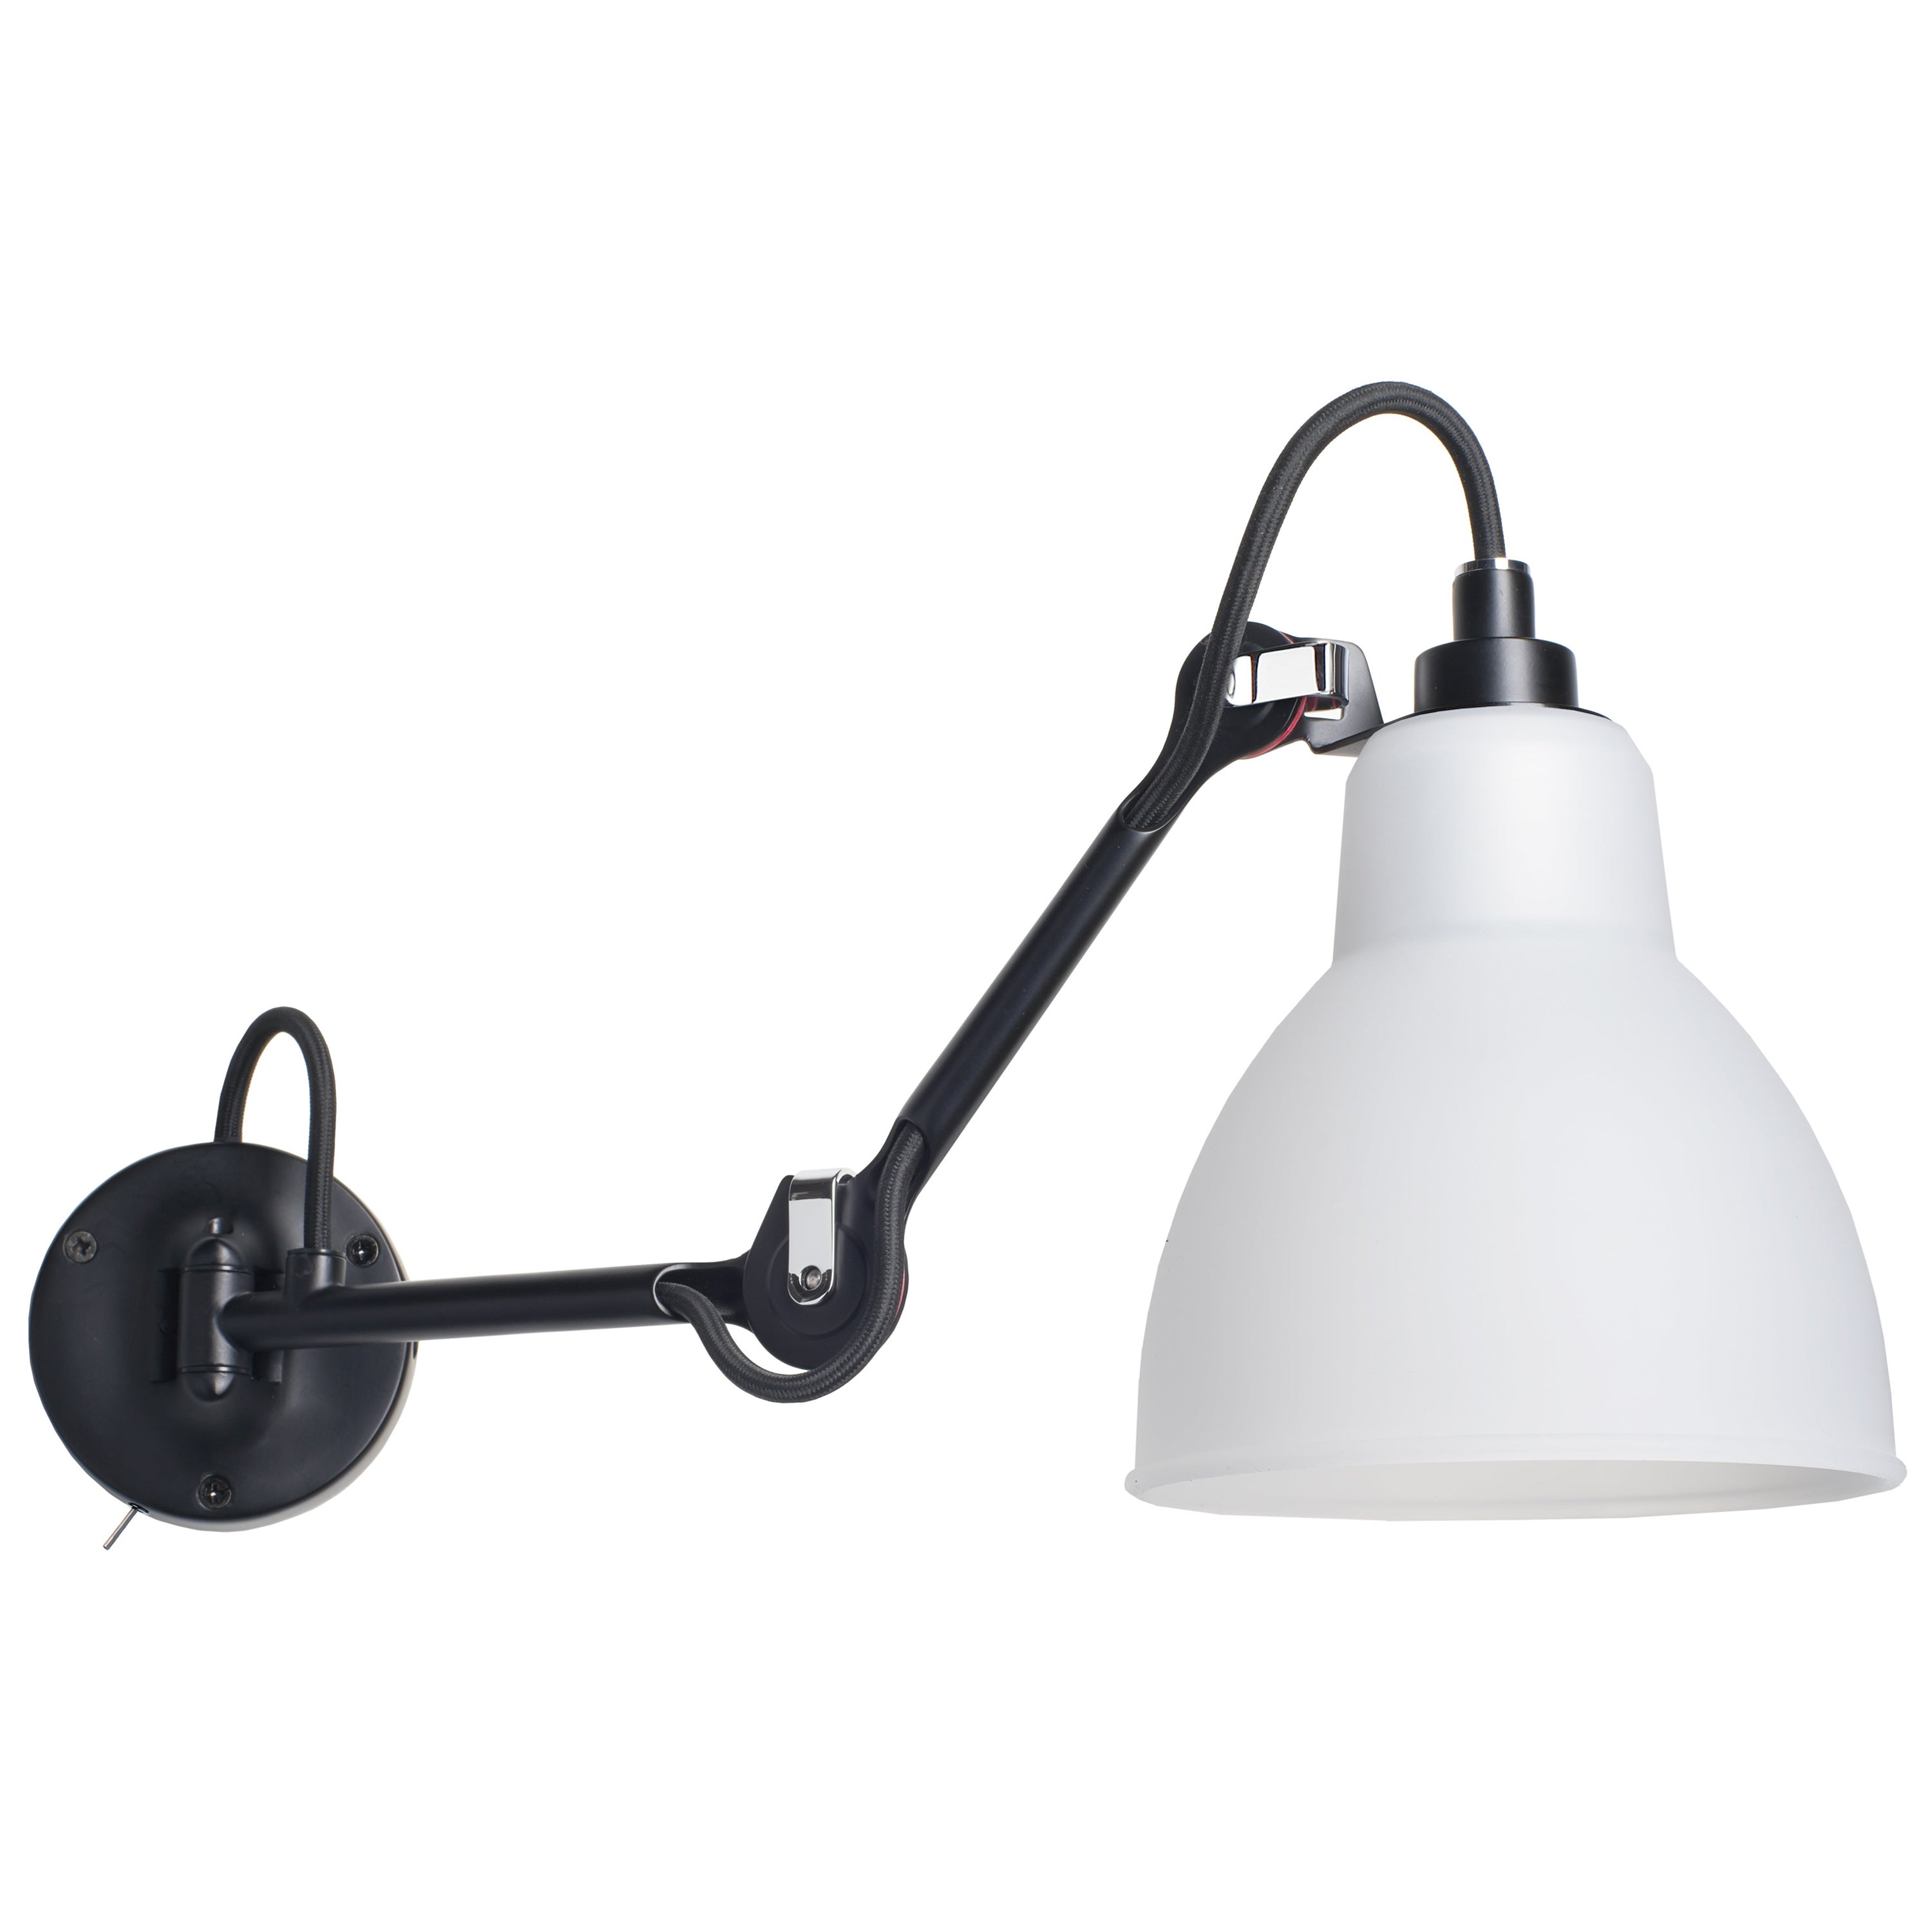 DCW Editions La Lampe Gras N°204 SW Wall Lamp in Black Arm & Polycarbonate Shade For Sale